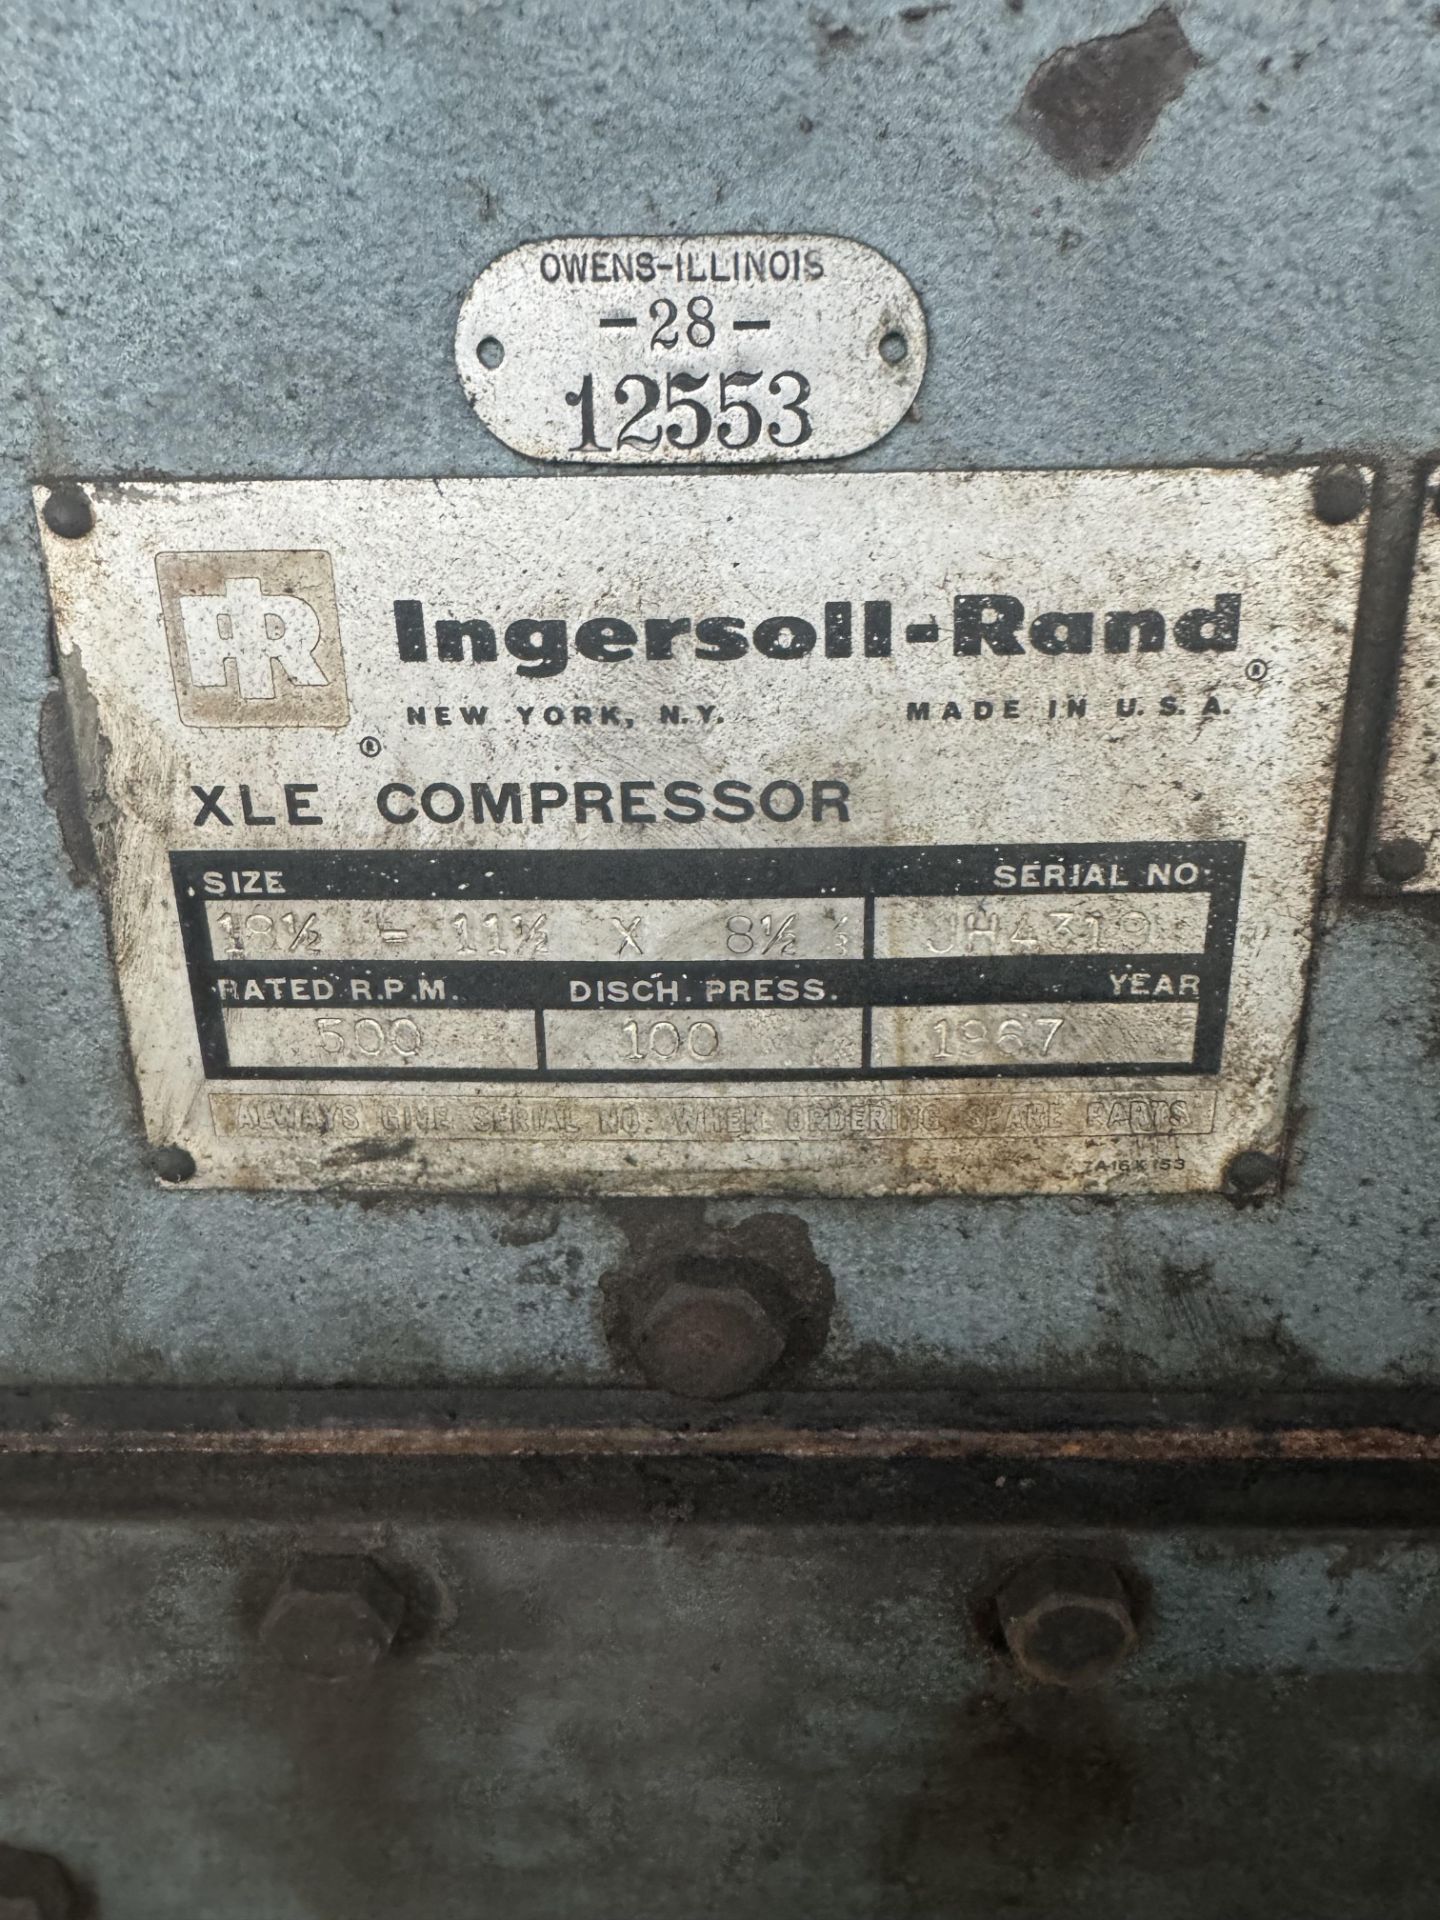 Ingersoll-Rand XLE Compressor, Serial# JH4319, 200 HP, Rigging/ Removal Fee - $1250 - Image 3 of 6